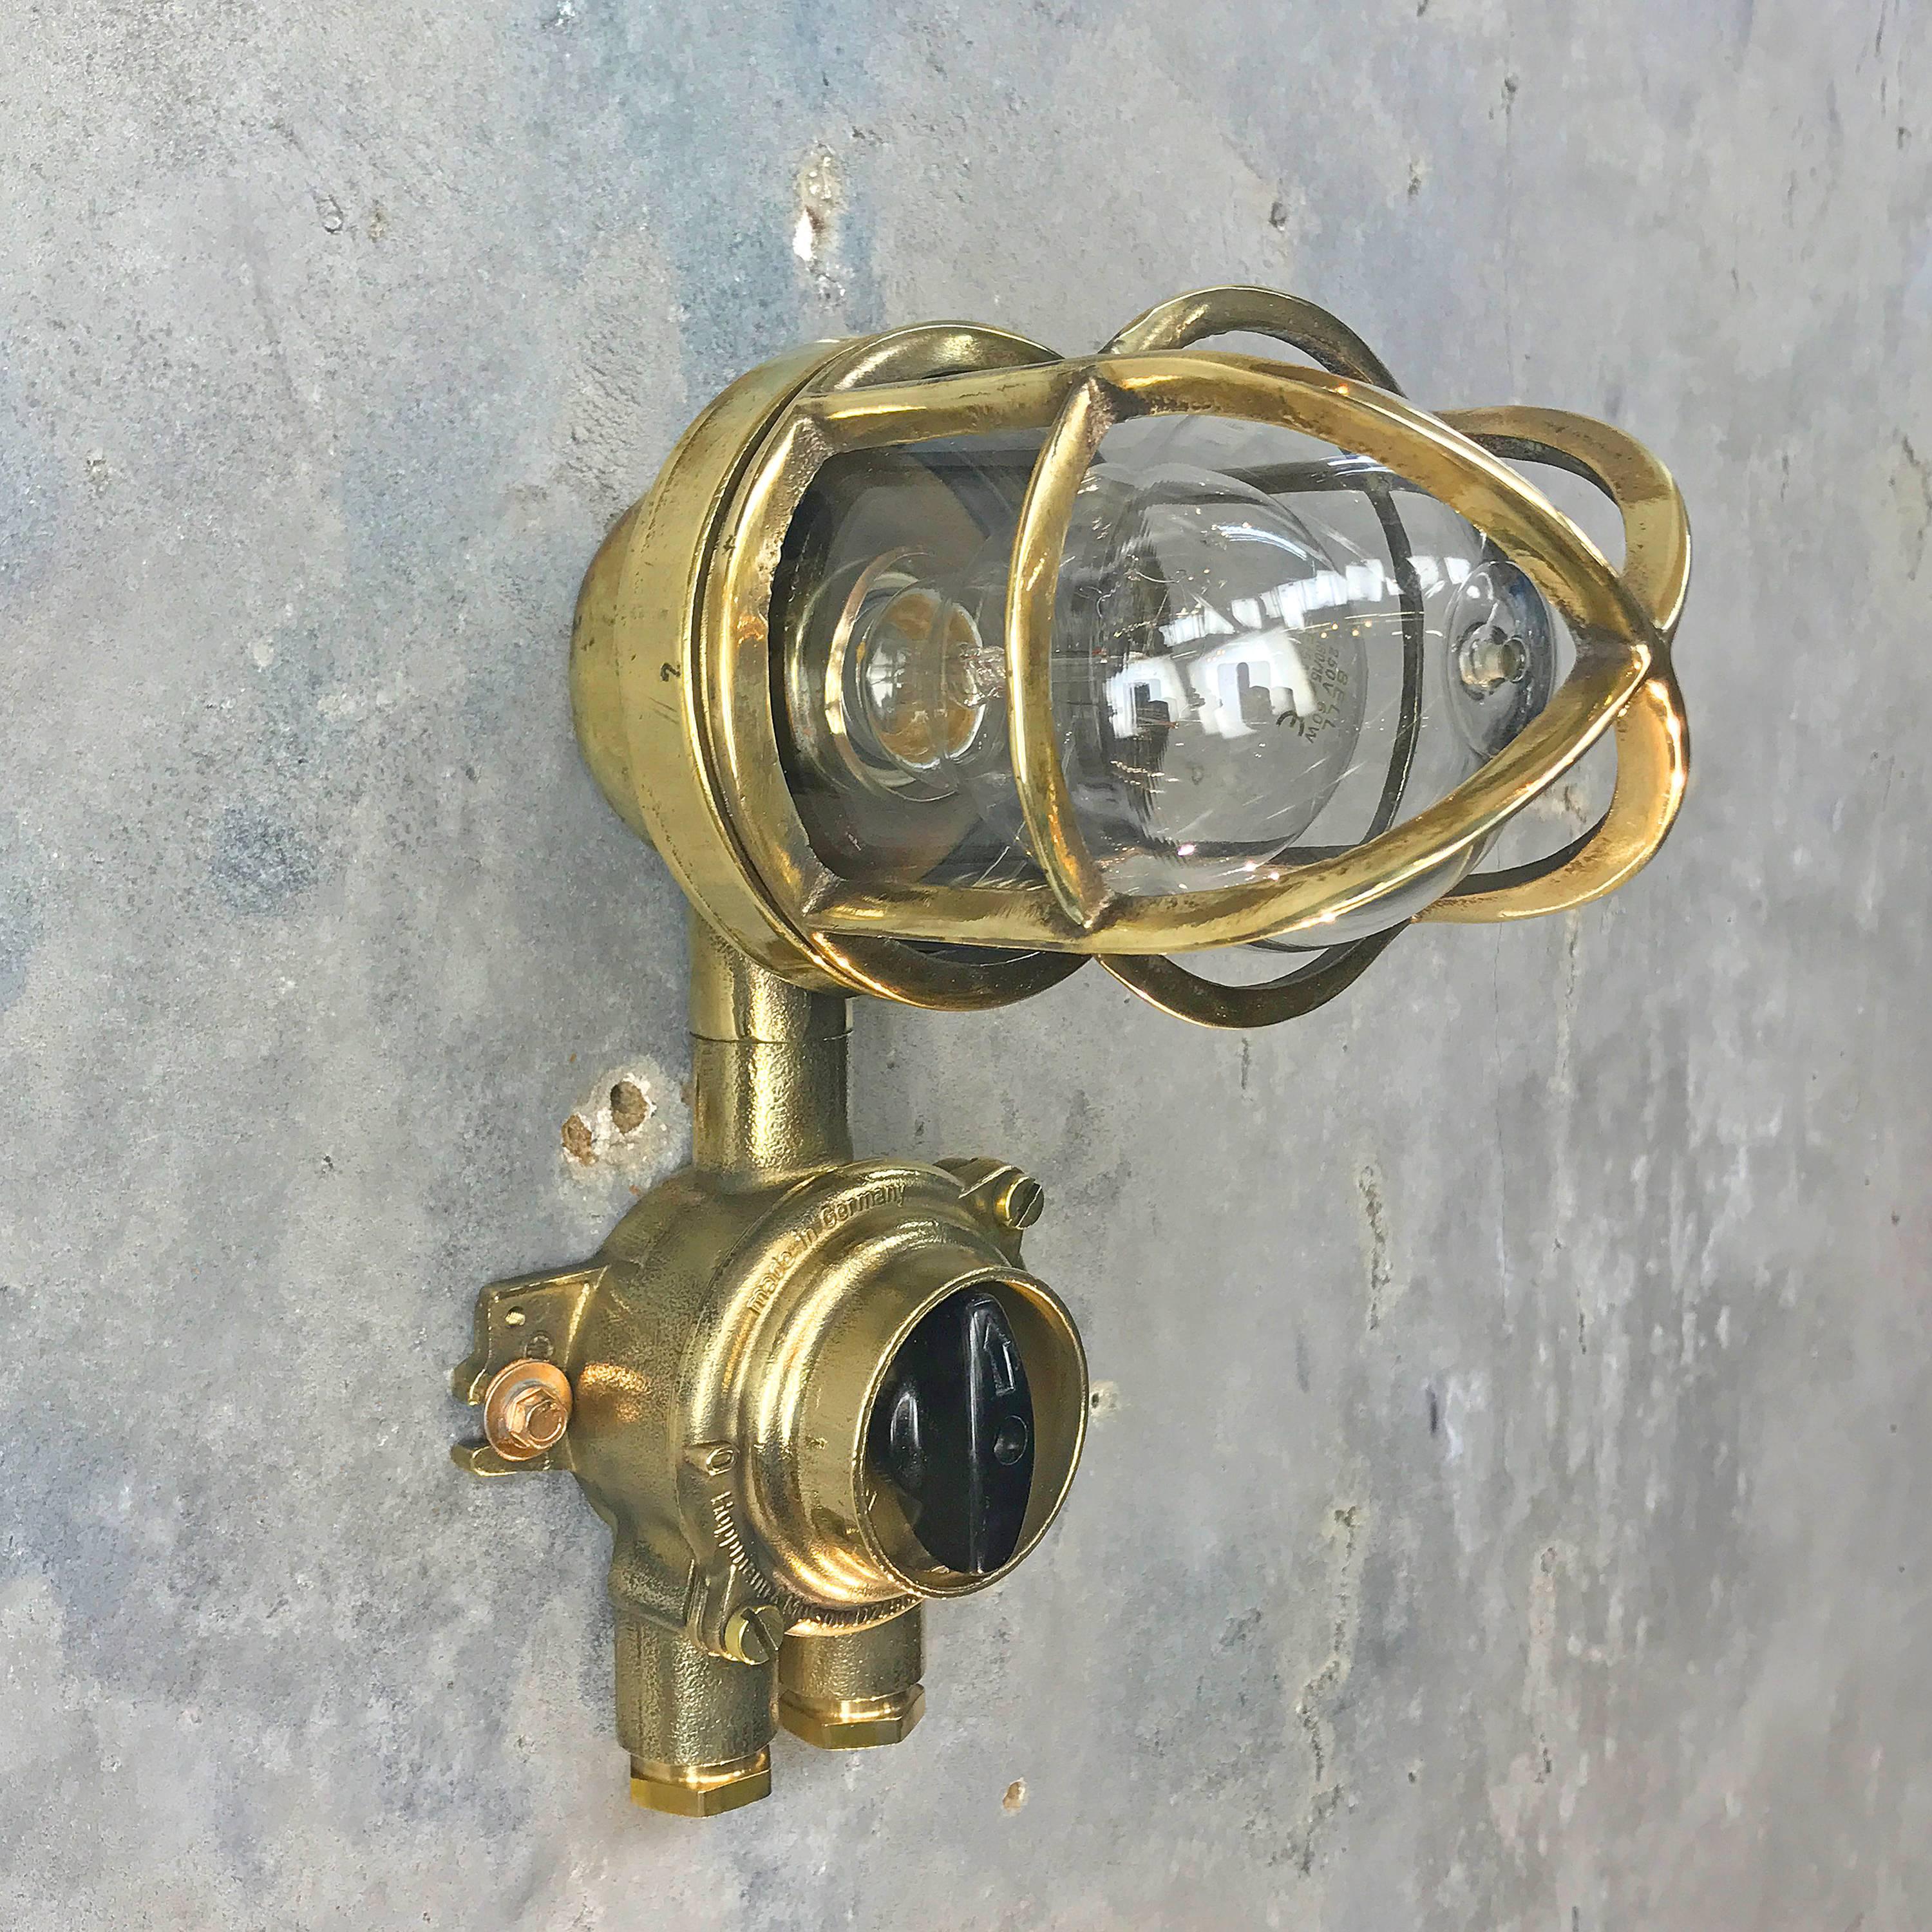 1970's German Brass Wall Lamp with Glass Dome & Isolator Switch IP54 Edison Bulb For Sale 1